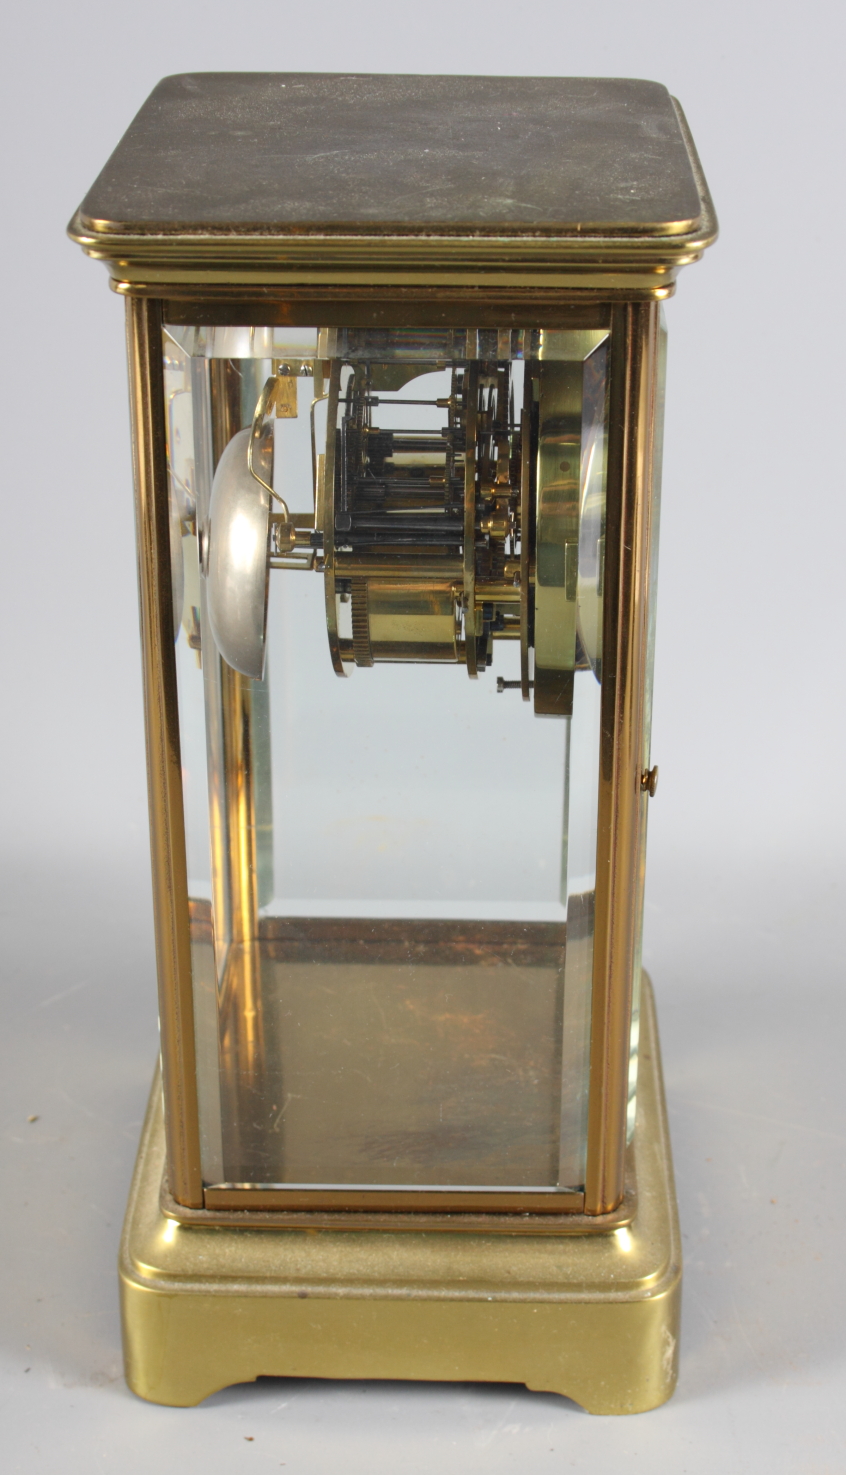 A 19th Century brass cased four-glass clock with white enamel dial and striking movement, 10 1/2" - Image 5 of 8